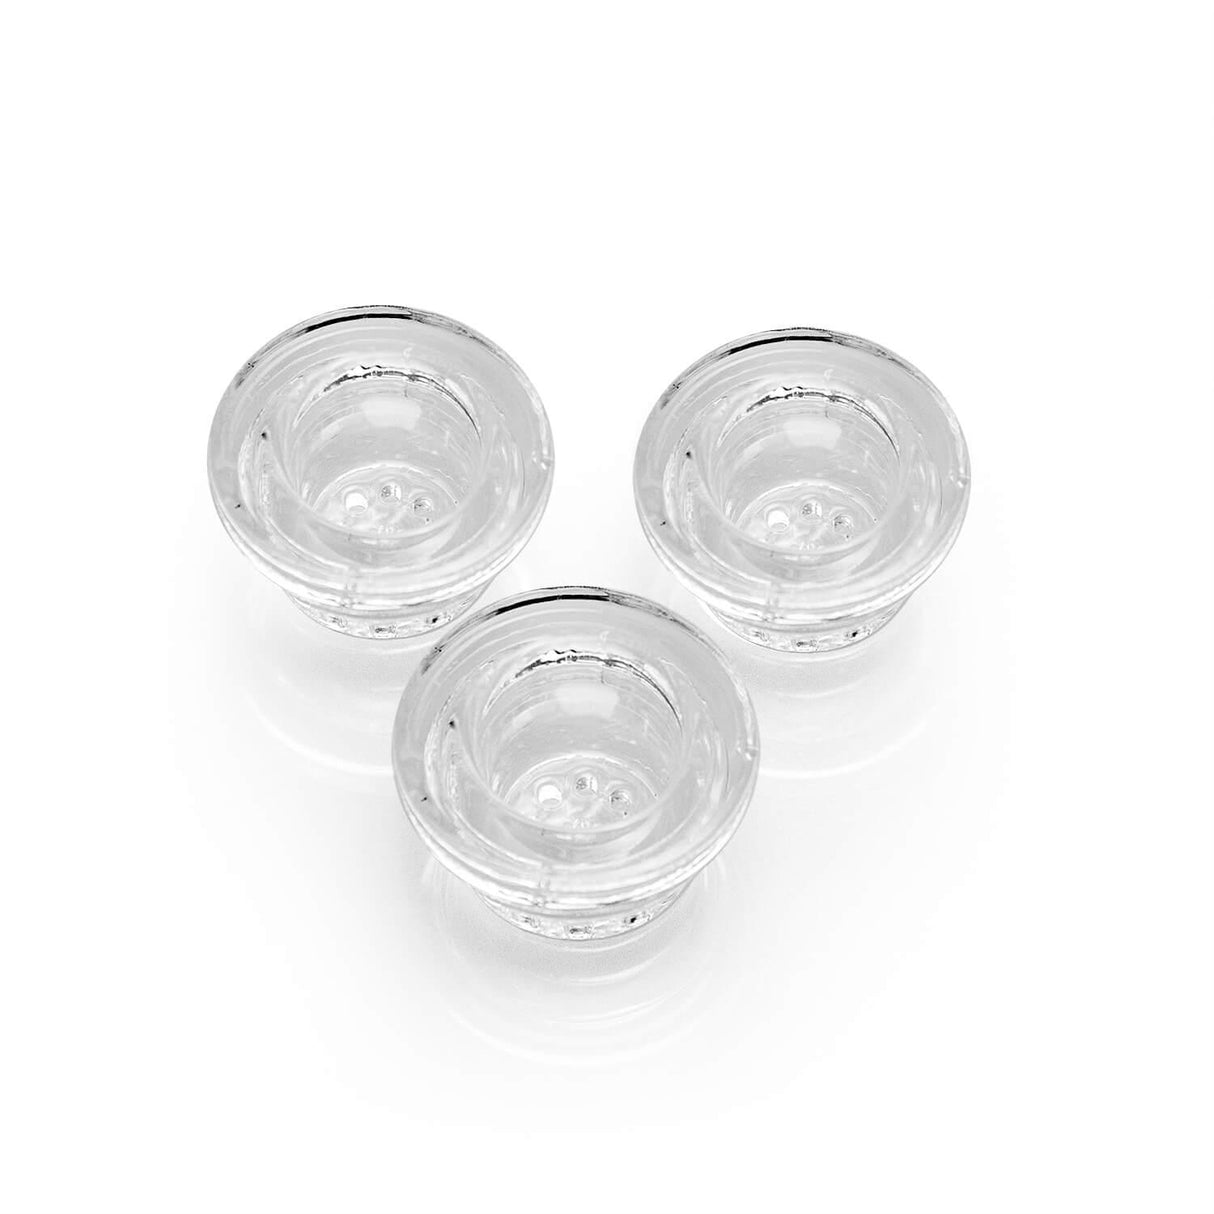 PILOT DIARY Glass Bowl Screen Replacement 3pcs Set on White Background